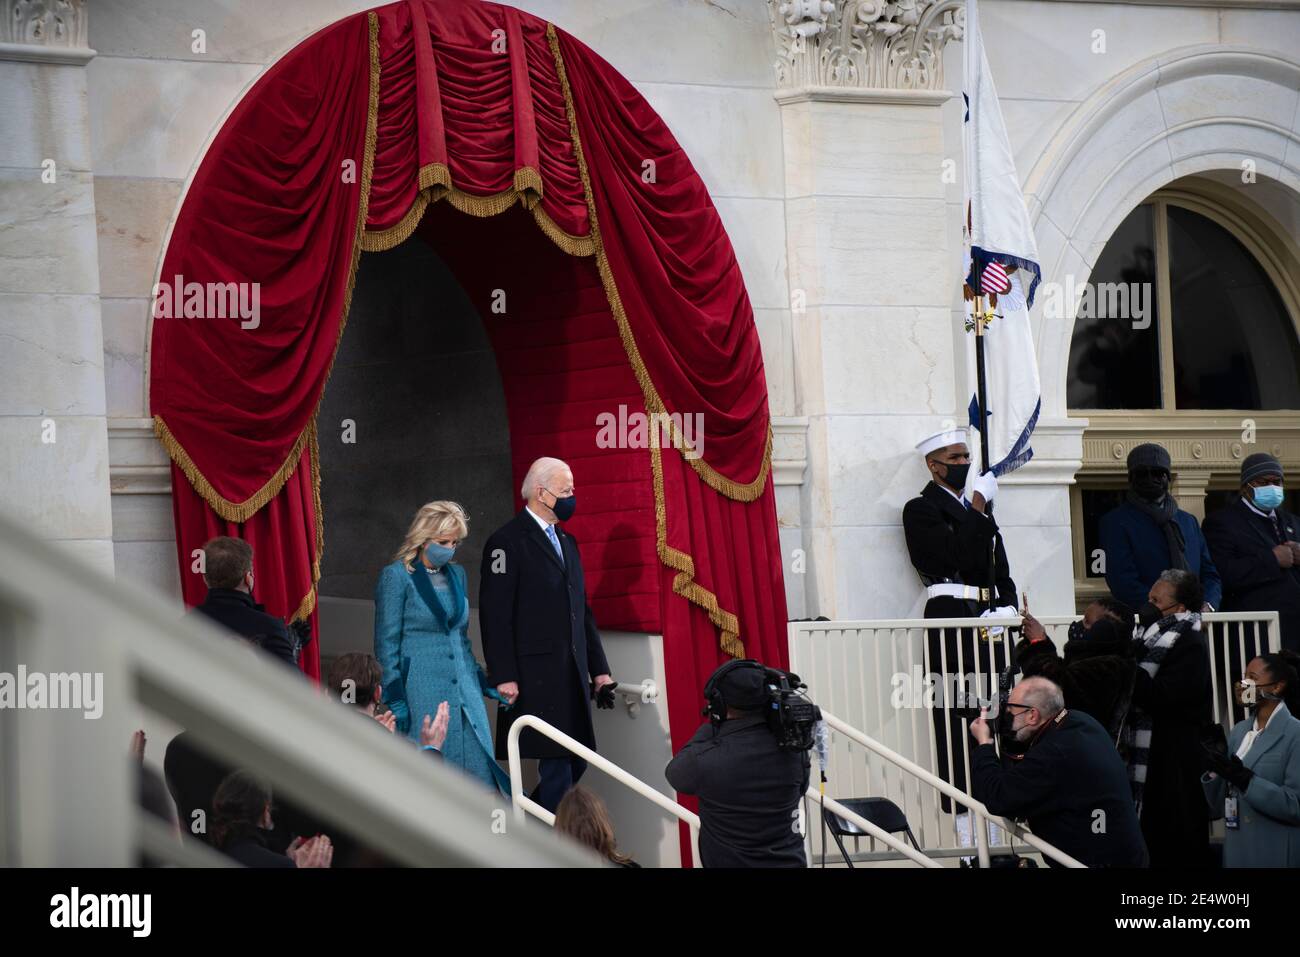 U.S. President-elect Joe Biden and his wife Dr. Jill Biden enter the inauguration platform during the 59th Presidential Inauguration ceremony at the West Front of the U.S. Capitol January 20, 2021 in Washington, D.C. Stock Photo